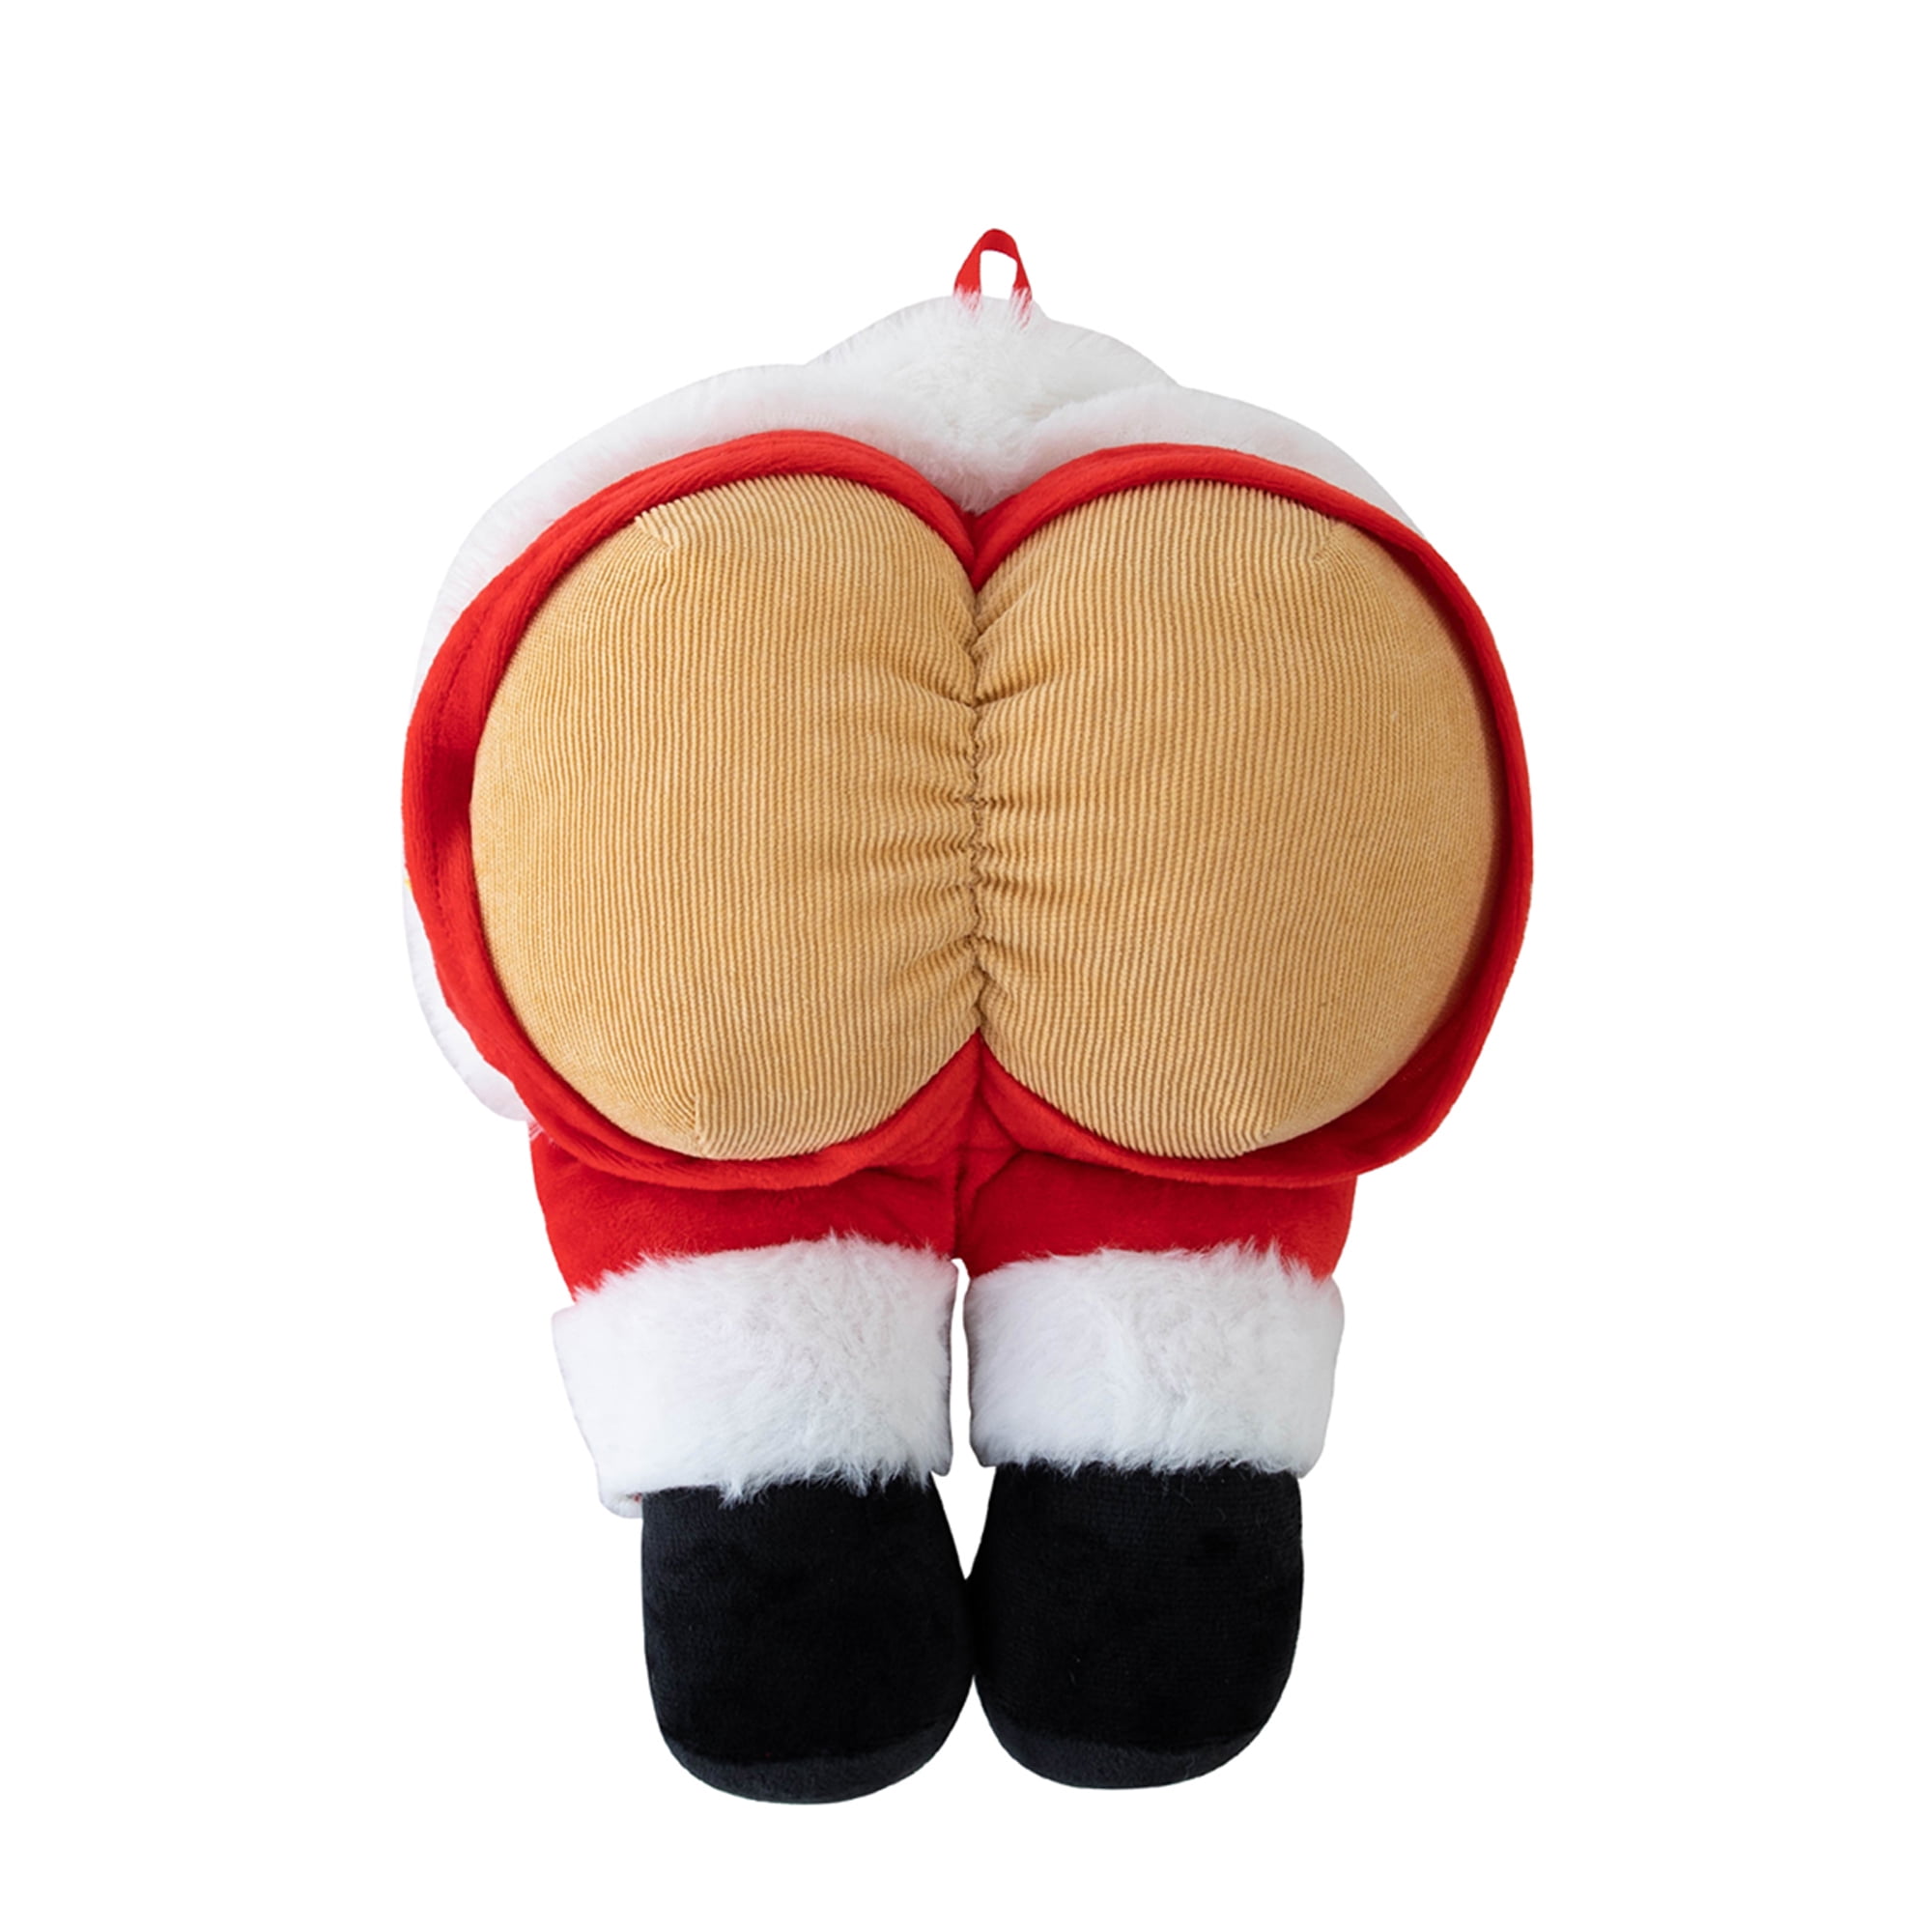 This Butt Pillow Is Perfect For a Quick Nap Or Snuggle By Your